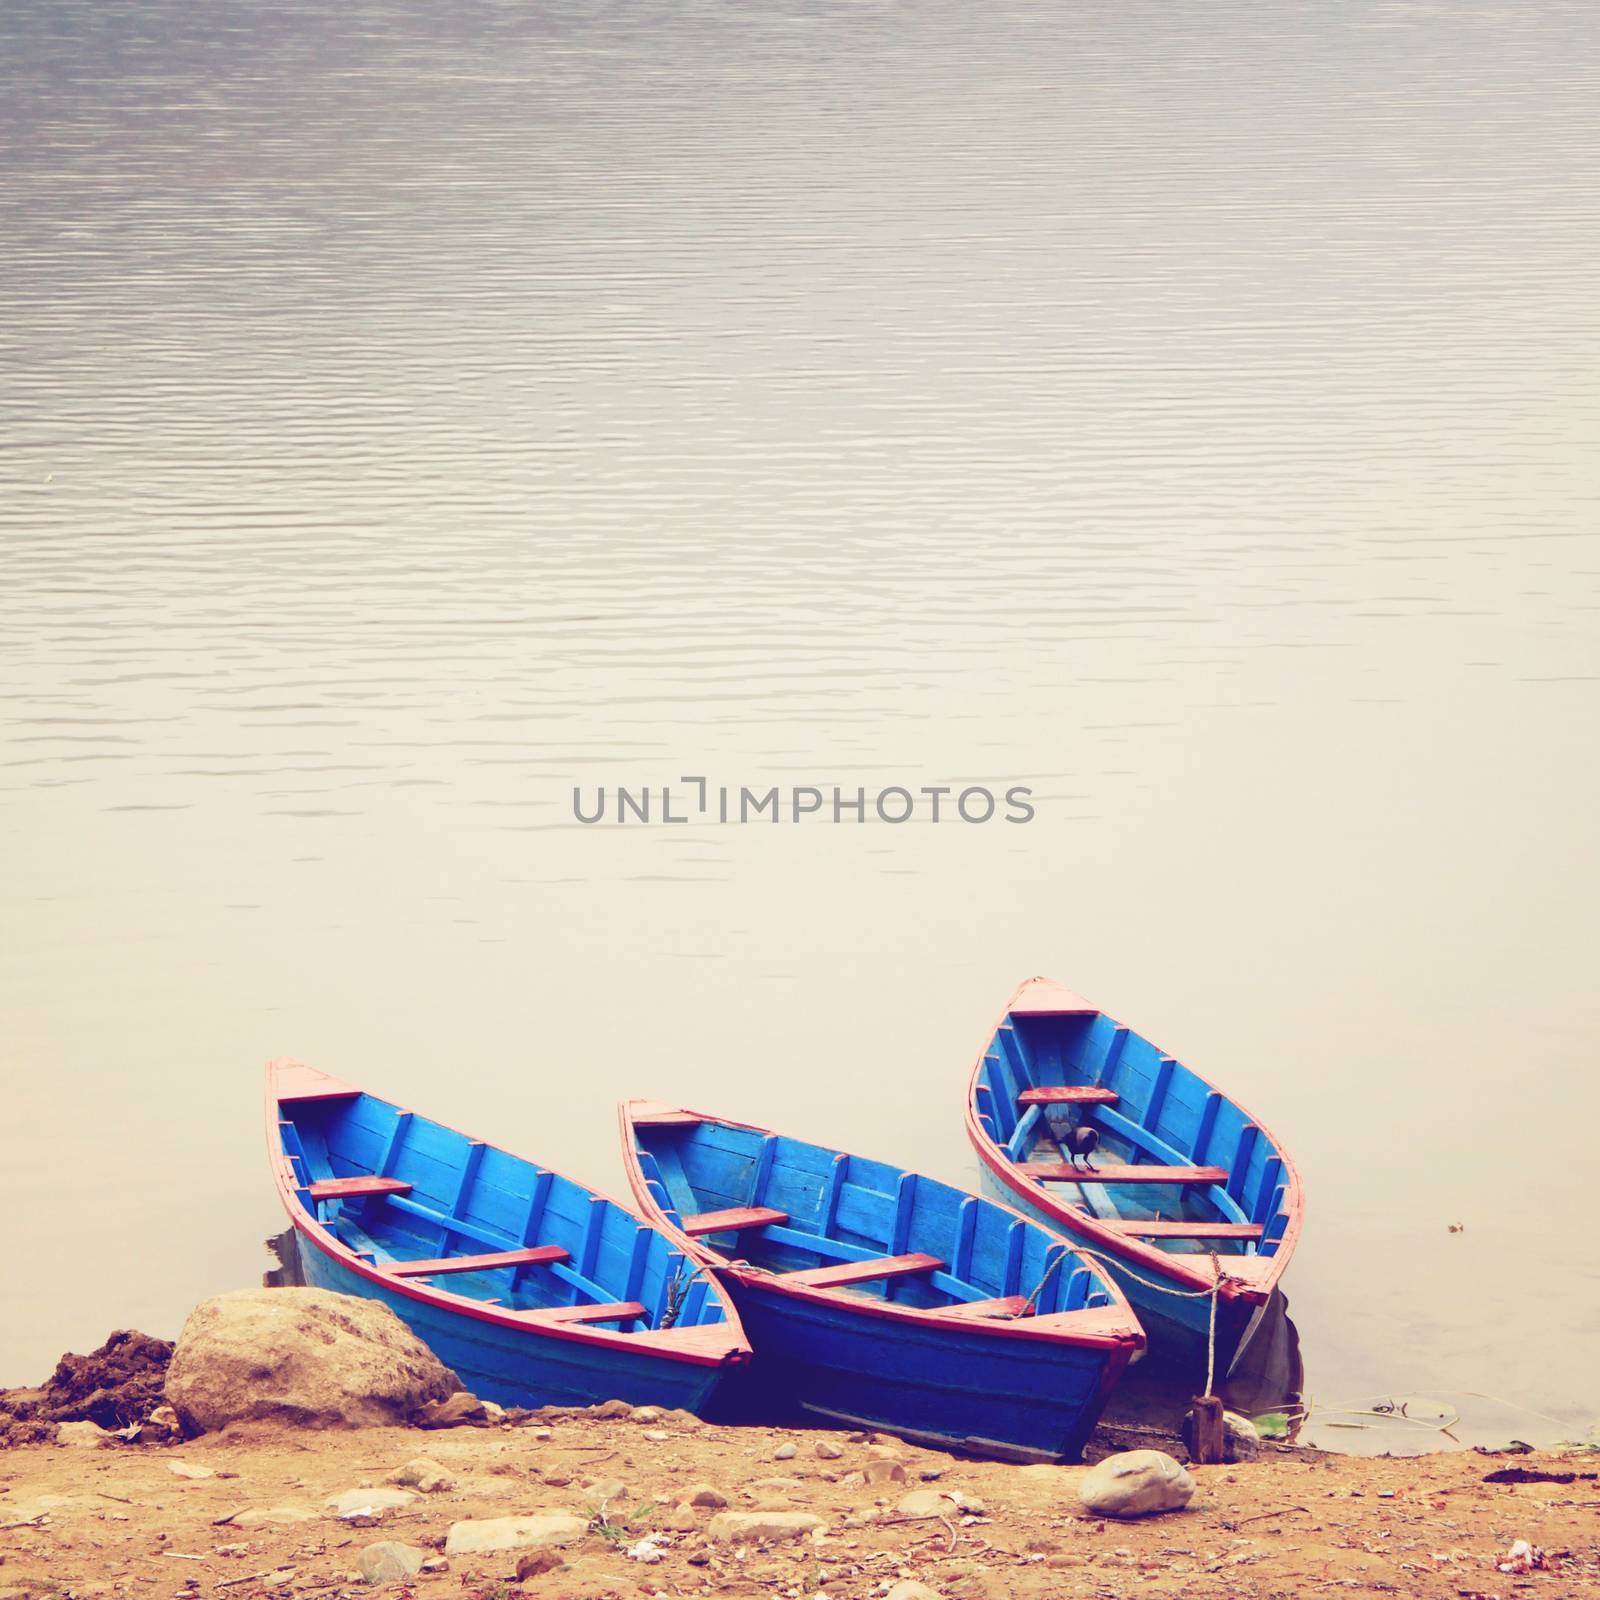 Three boats on the lake with retro filter effect by nuchylee